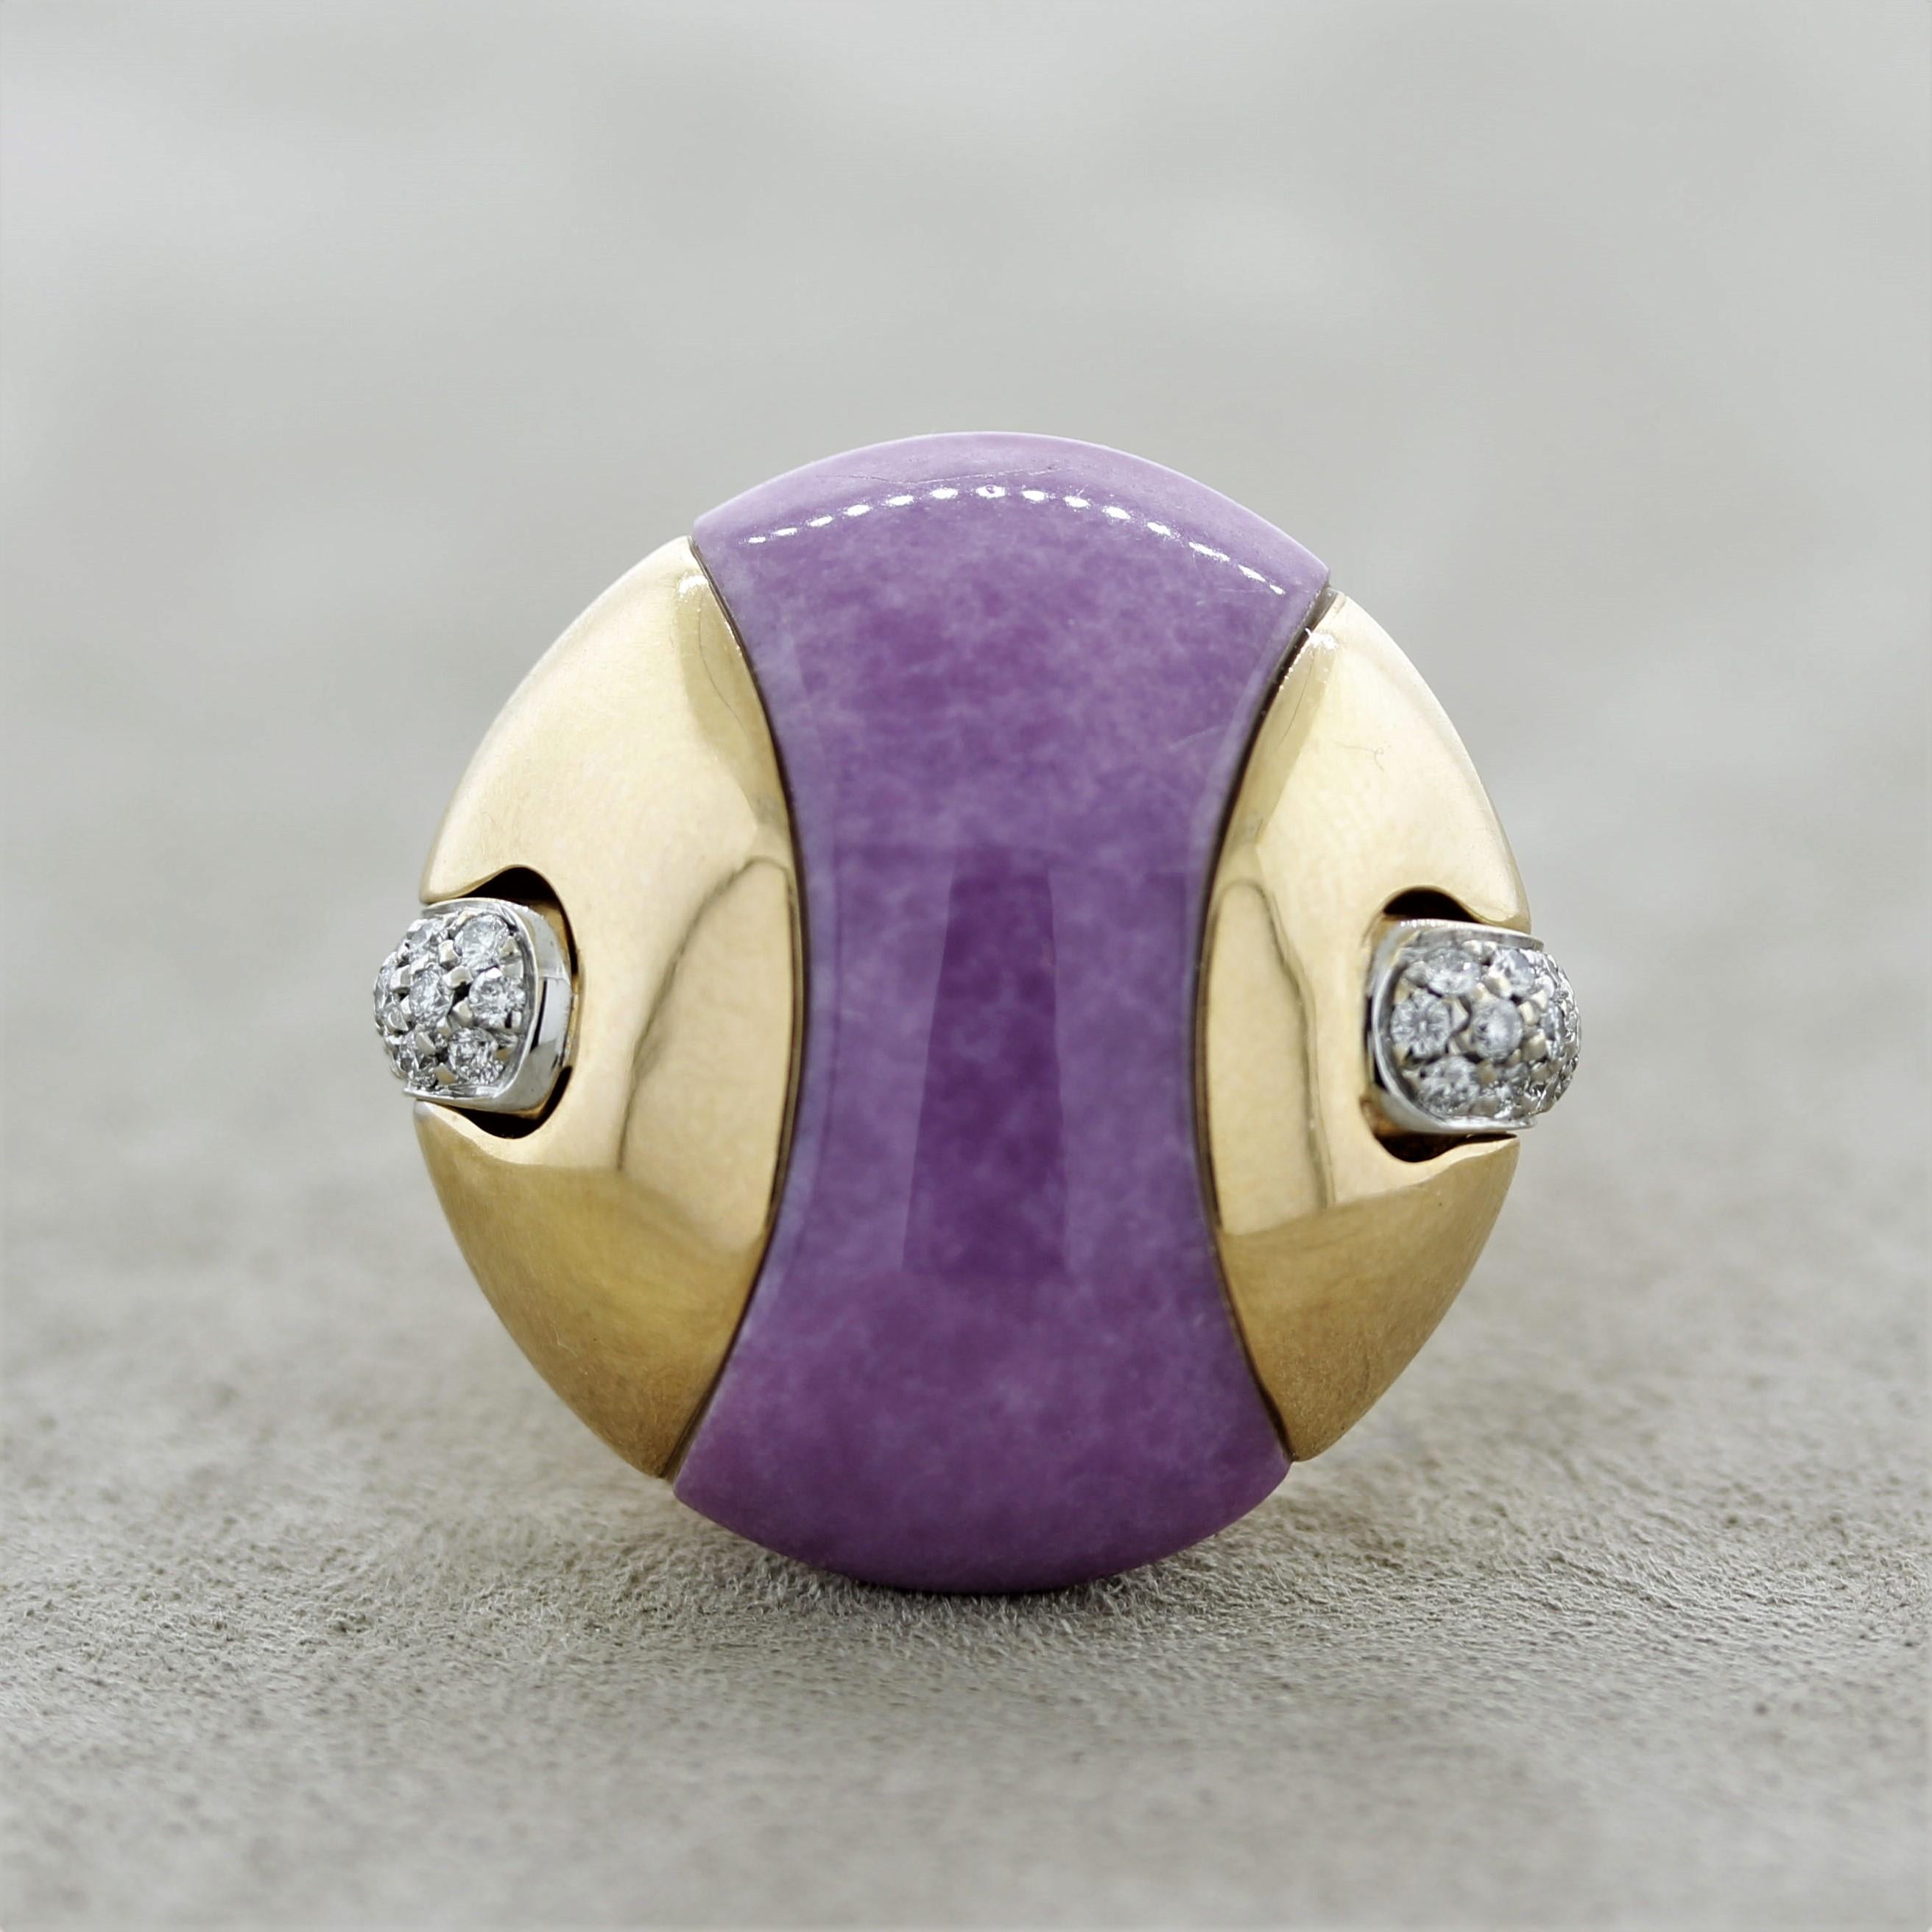 A uniquely designed ring featuring a hand carved and polished lavender jade weighing 24.75 carats. It is carved to fit exactly between the gold sides of the ring creating a seamless finish. It is accented by 0.42 carats of round brilliant-cut